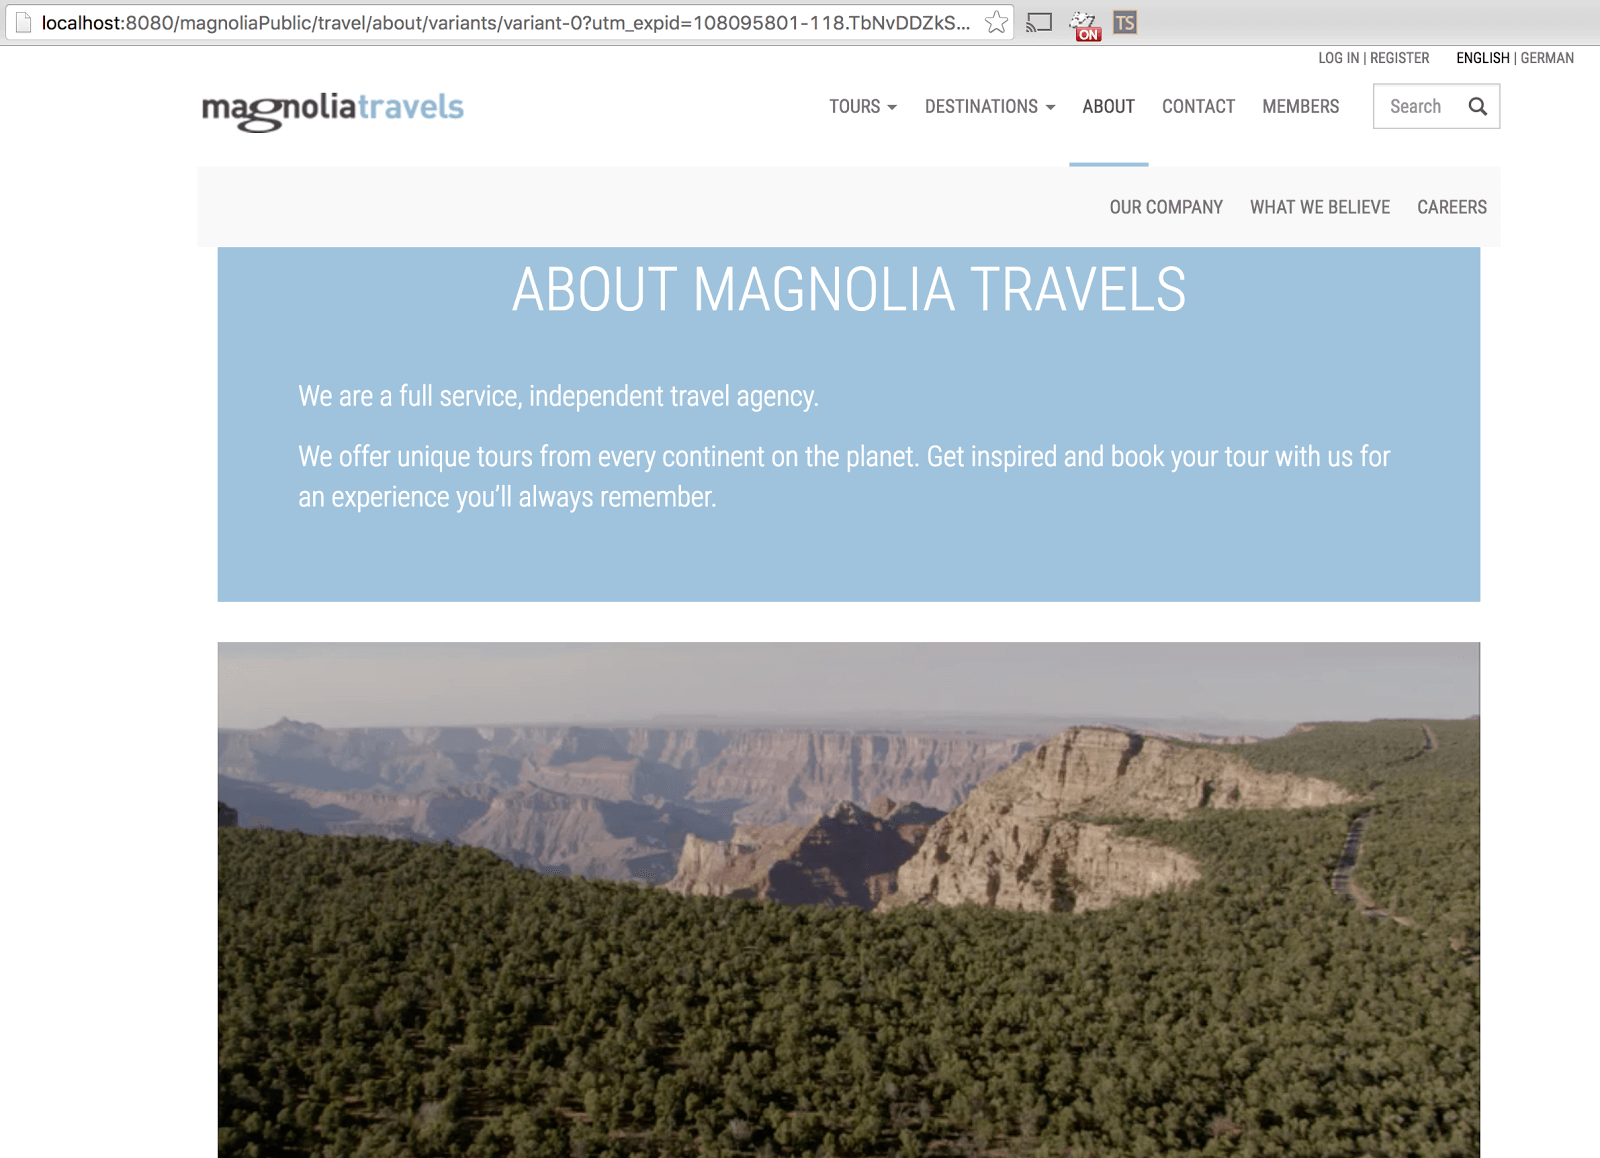 Magnolia travels page